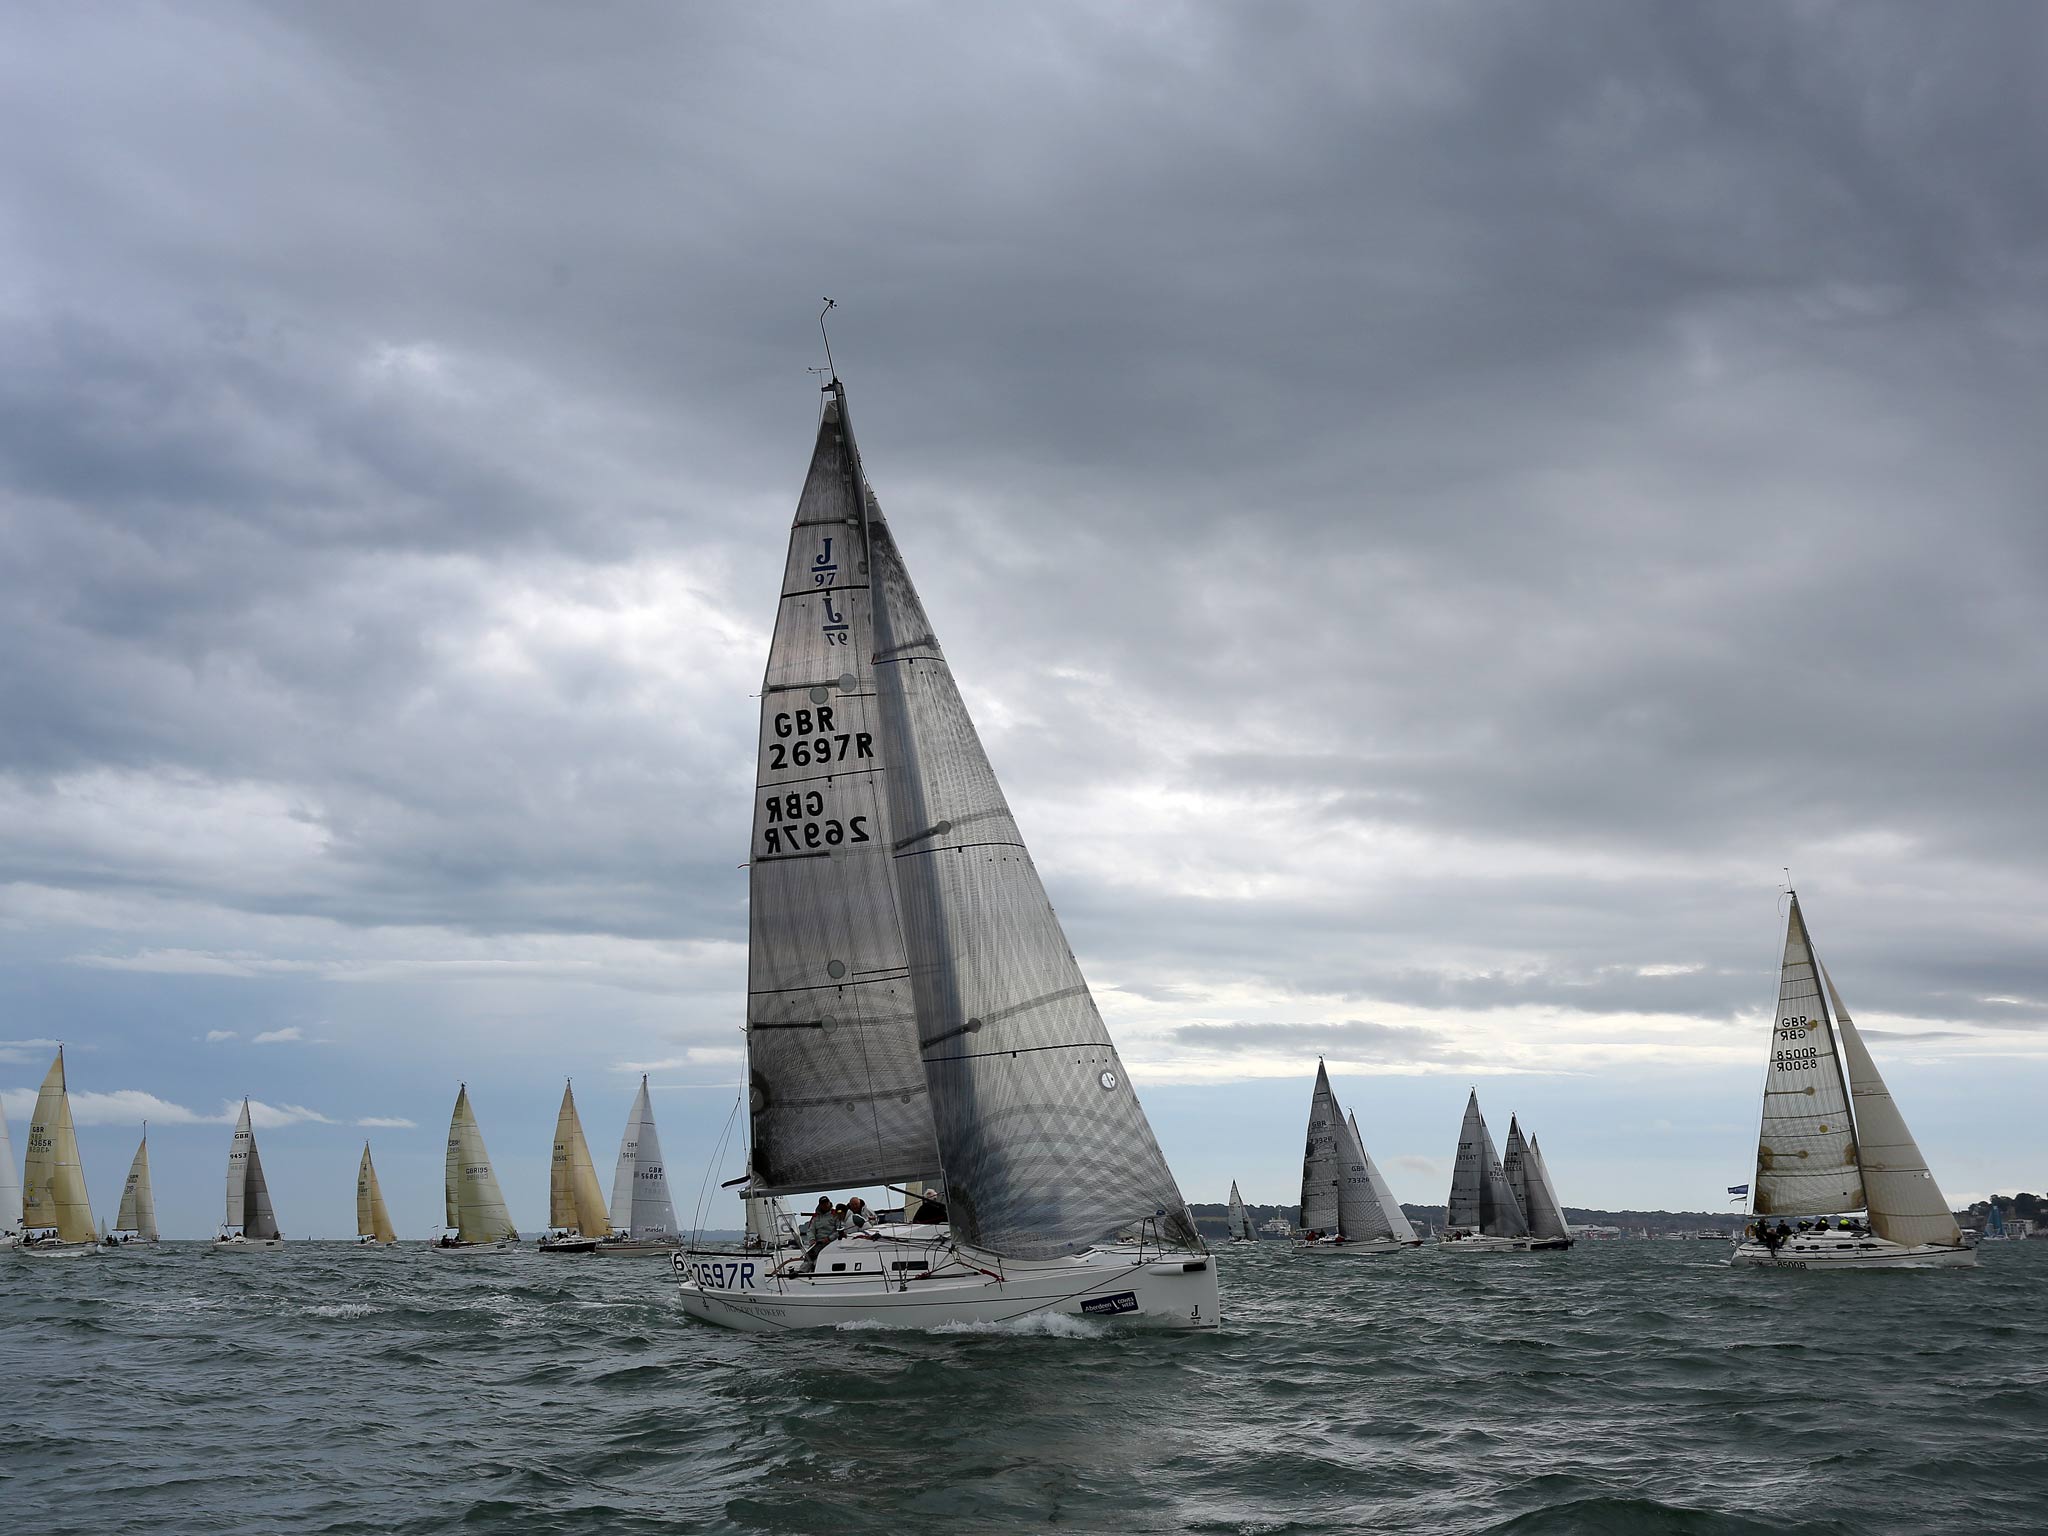 A view of the action at Cowes